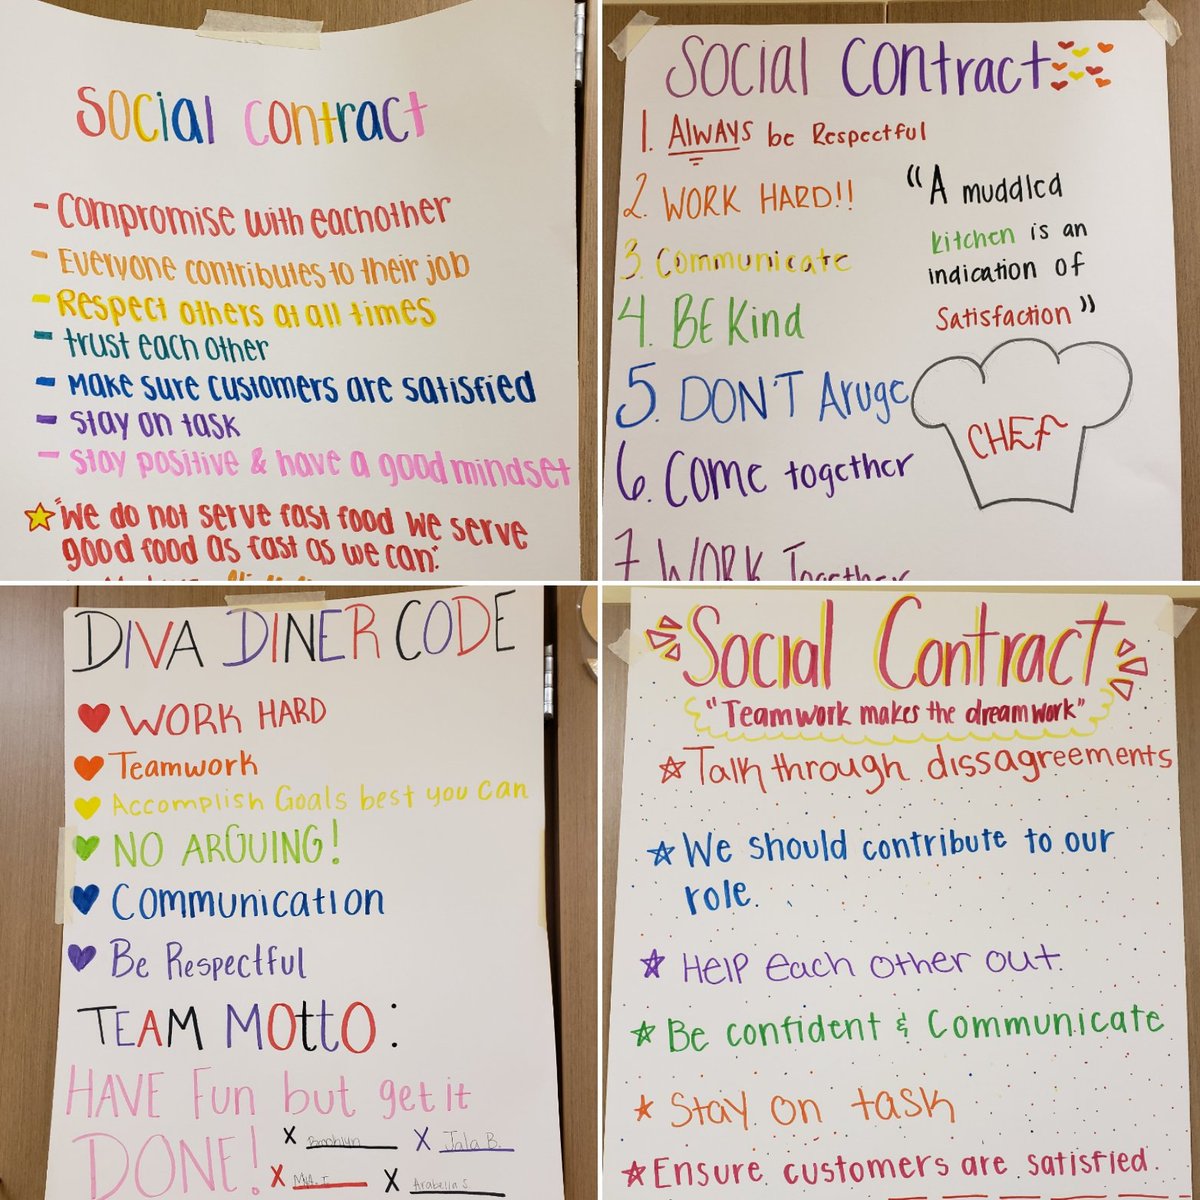 PHS students made social contracts to kick off their first official day as a Restaurant Wars team! @MCJHGators @simmons_kaya #MaydeByPHS #MCJHRestaurantWars #socialcontracts #teamworkmakesthedreamwork